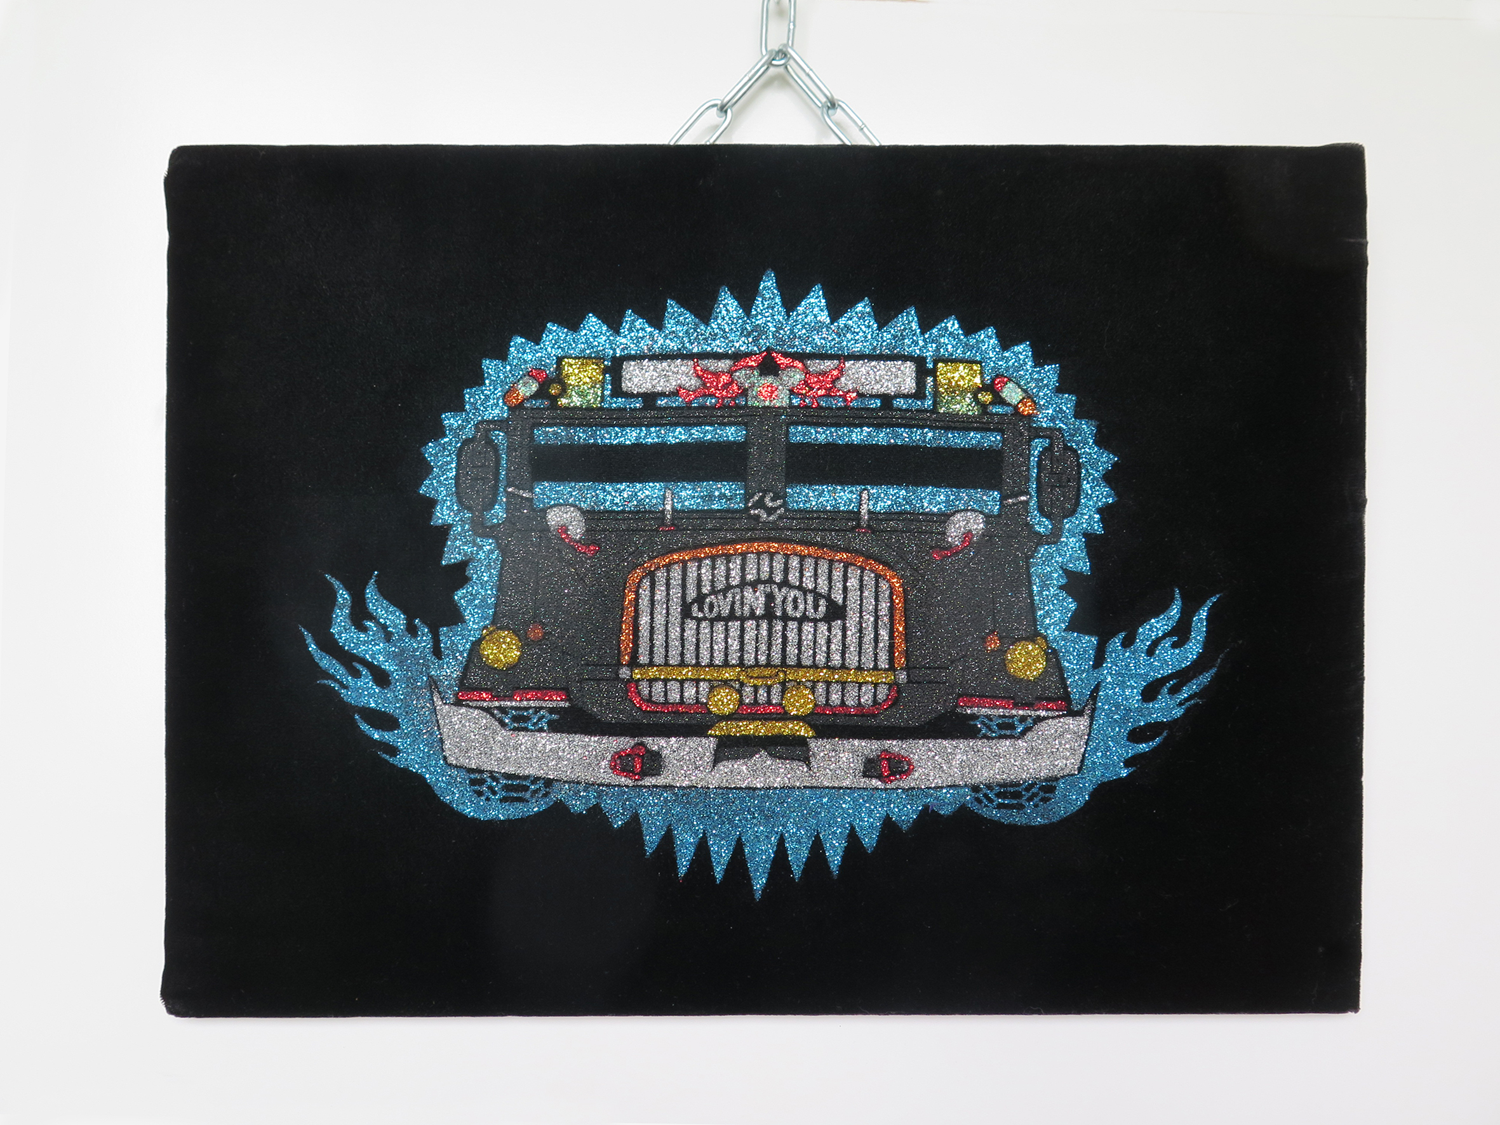 A padded velvet work featuring a multiple colour glitter screenprint of a truck called with Lovin' You on the grill. 